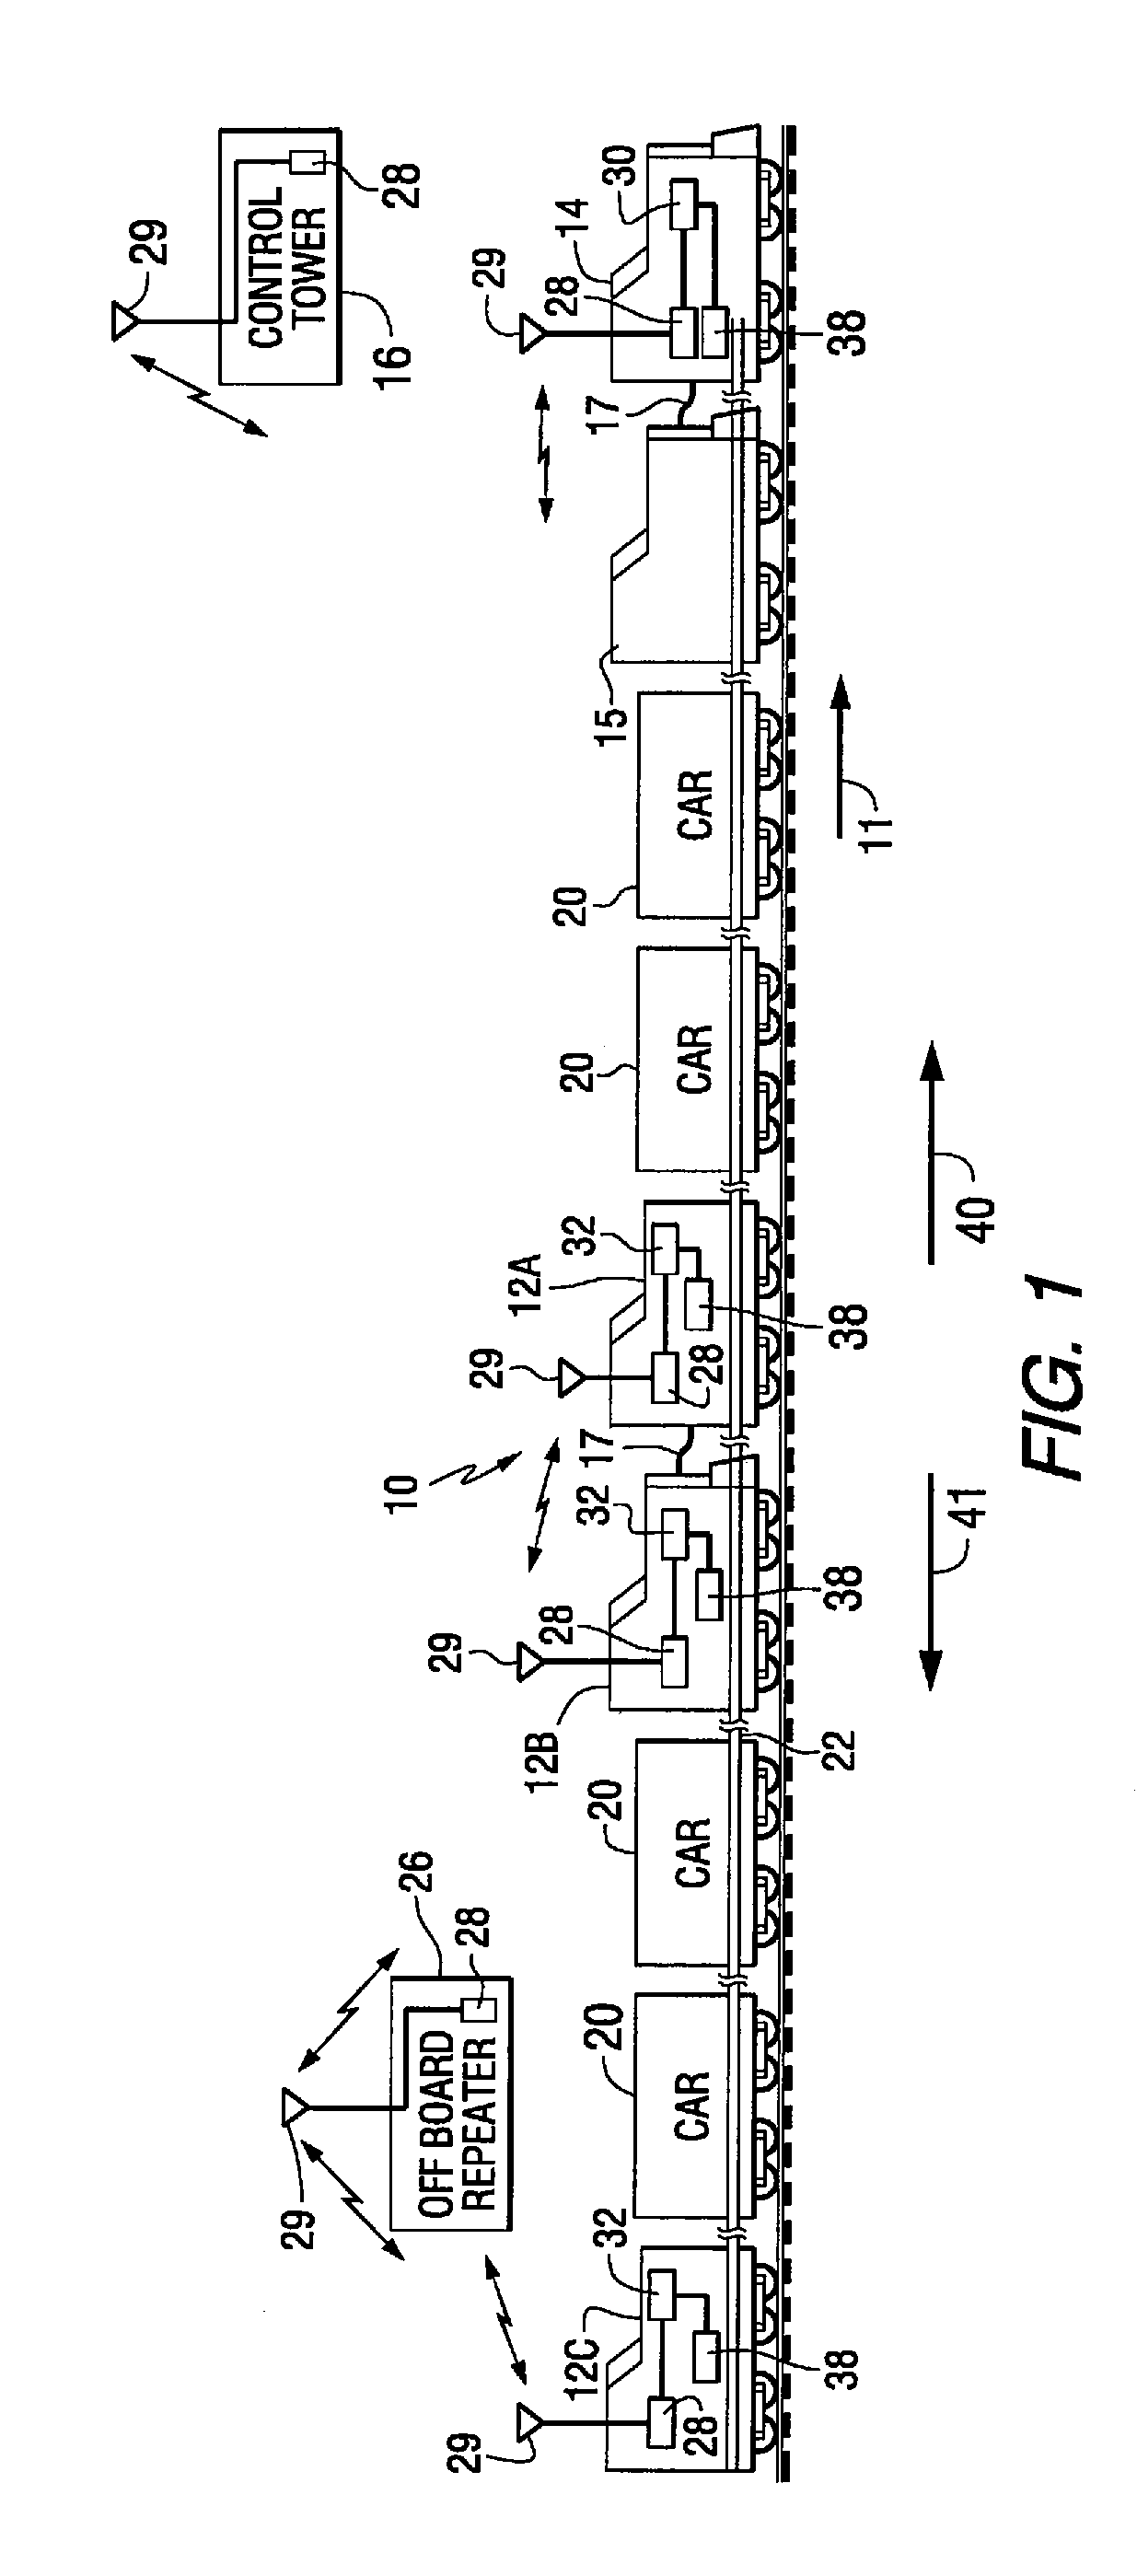 Method and apparatus for distributed power train control